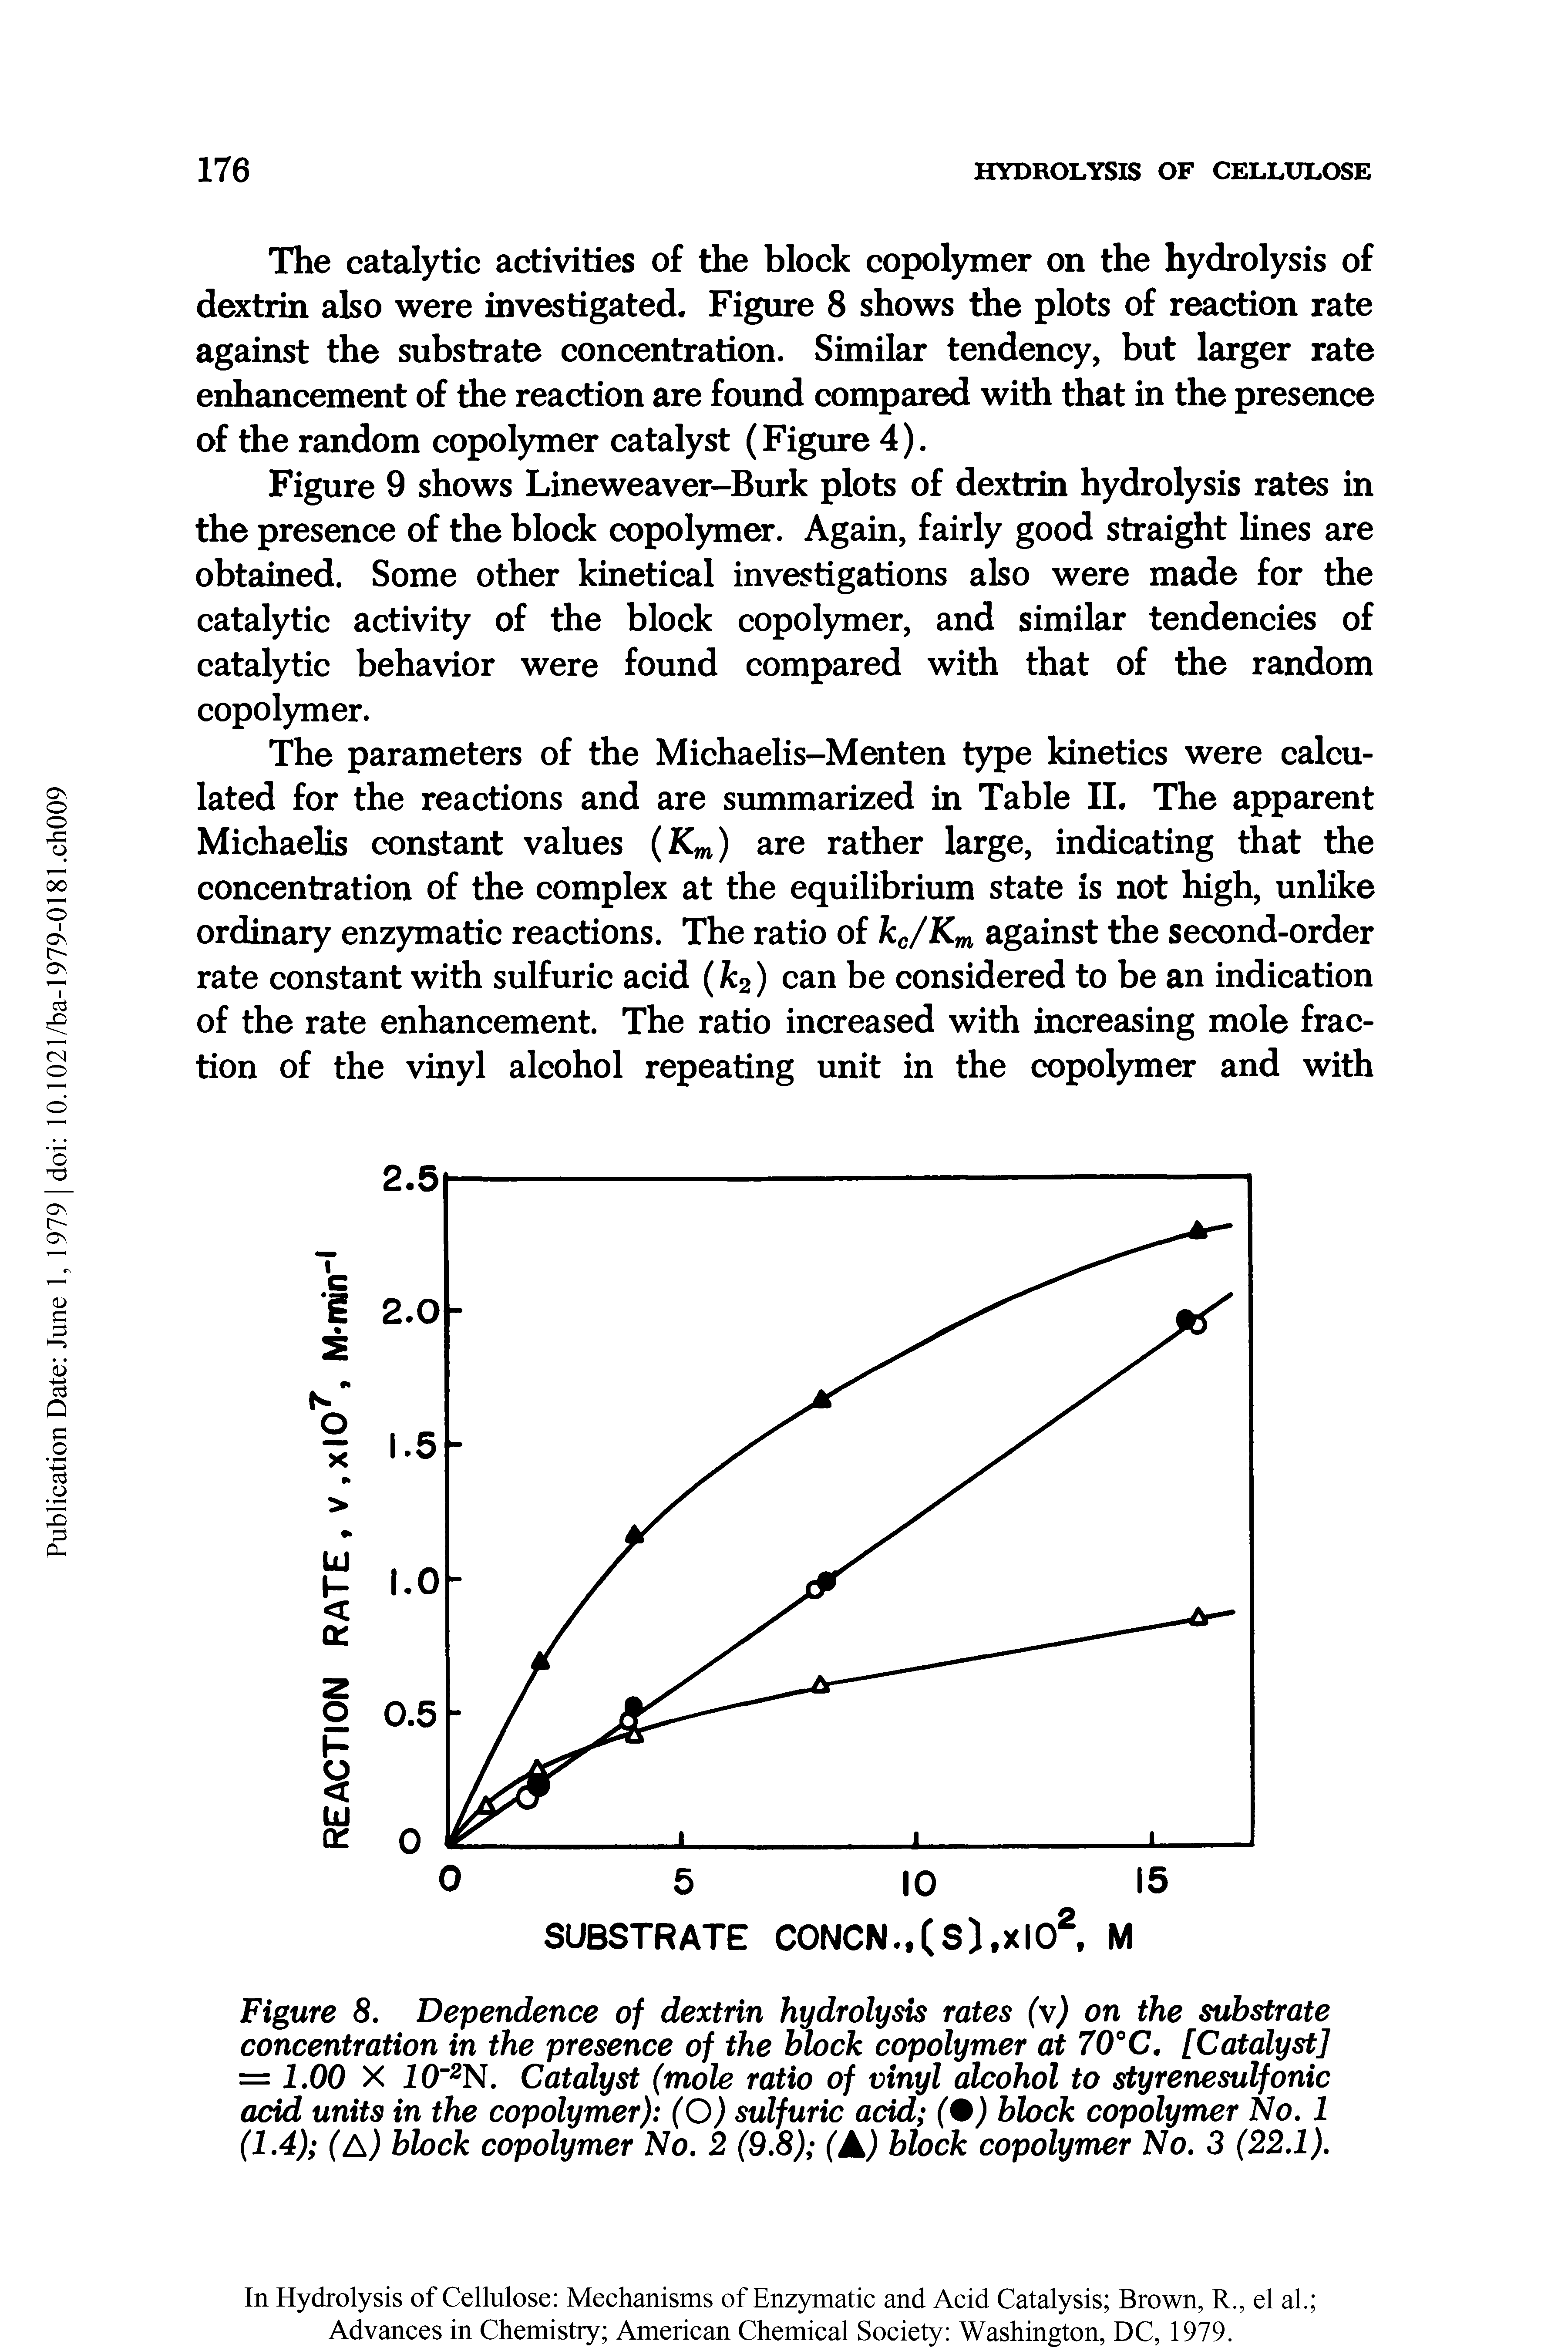 Figure 8. Dependence of dextrin hydrolysis rates (v) on the substrate concentration in the presence of the block copolymer at 70°C. [Catalyst] = 1.00 X 10 2N. Catalyst (mole ratio of vinyl alcohol to styrenesulfonic acid units in the copolymer) (O) sulfuric acid (%) block copolymer No. 1 (1-4) (A) block copolymer No. 2 (9.8) (A) block copolymer No. 3 (22.1).